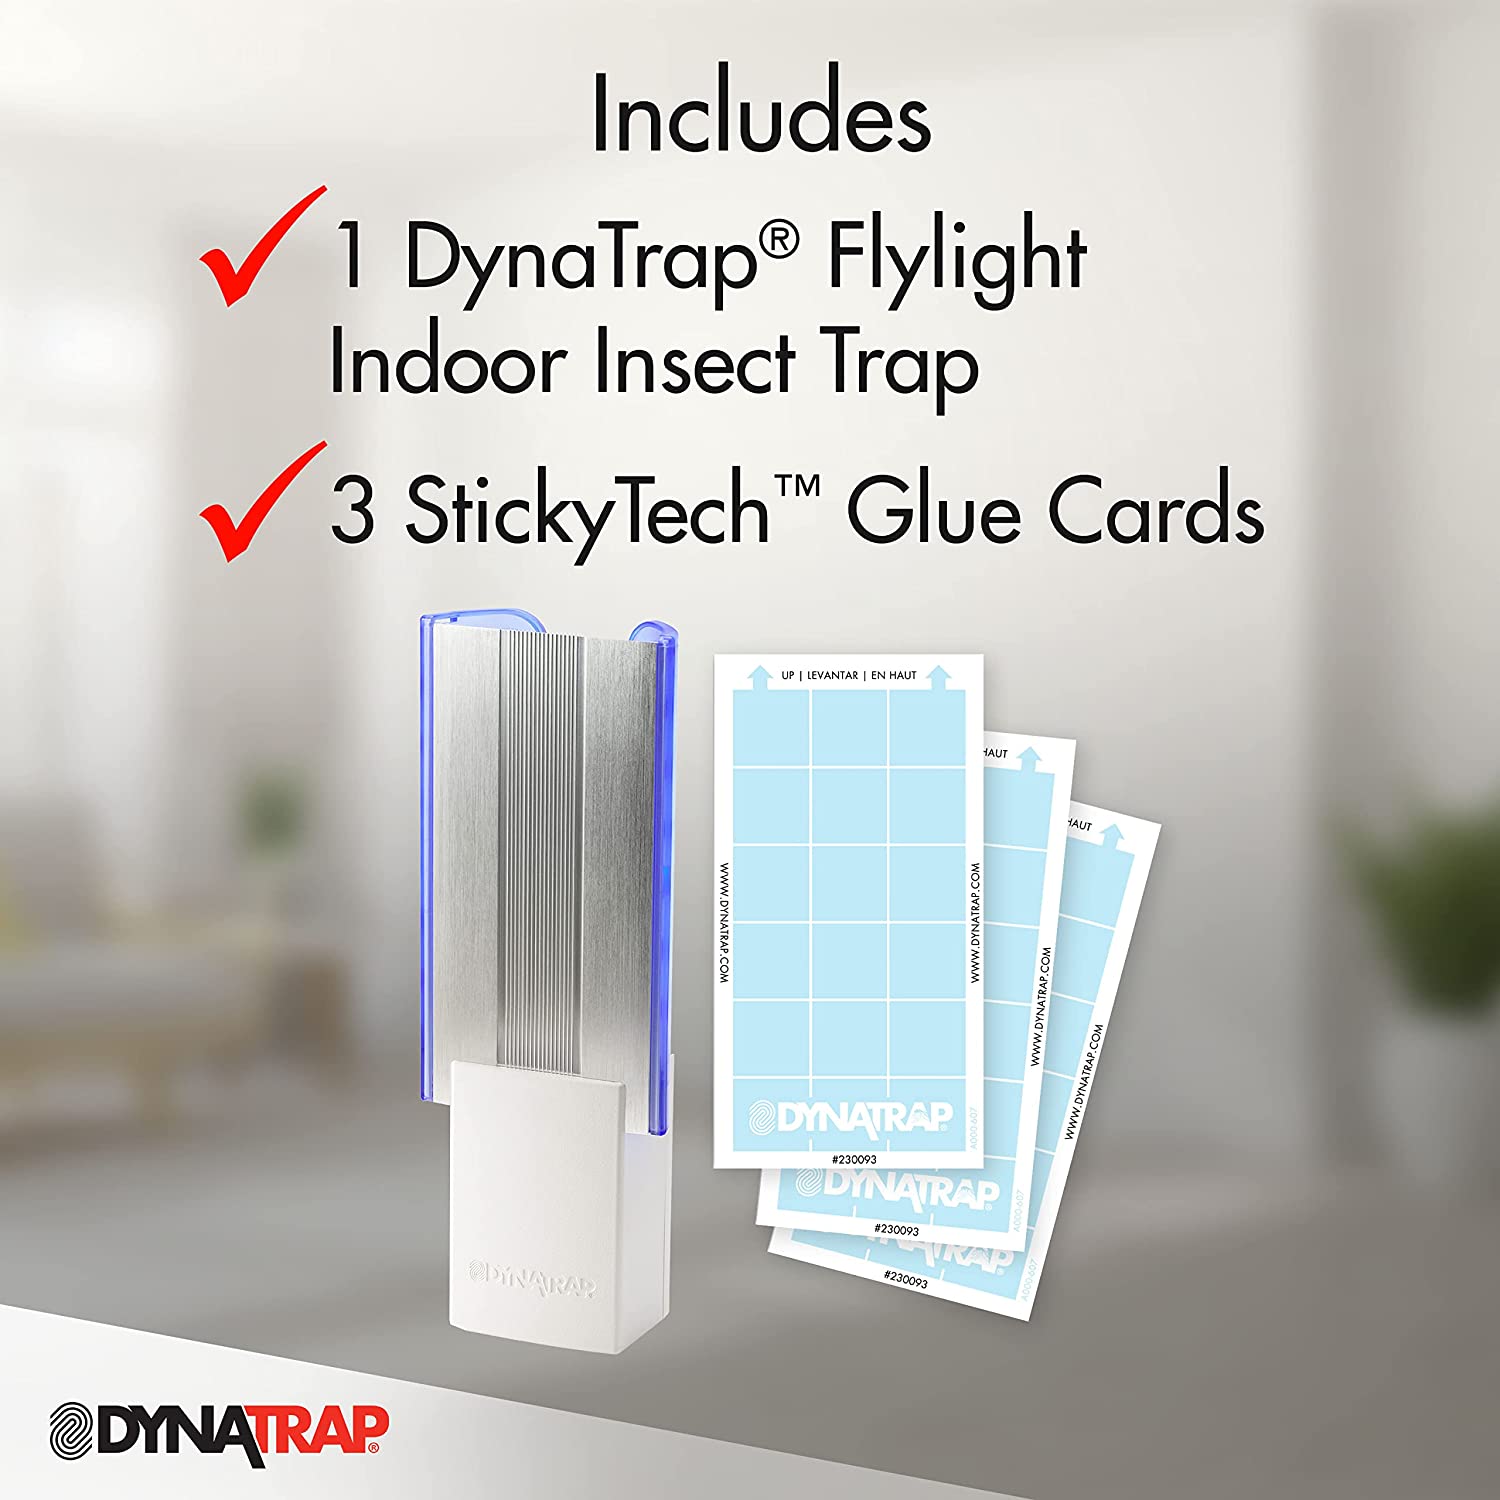 DynaTrap 230093 Replacement StickyTech Glue Cards for Flylight Indoor Plain